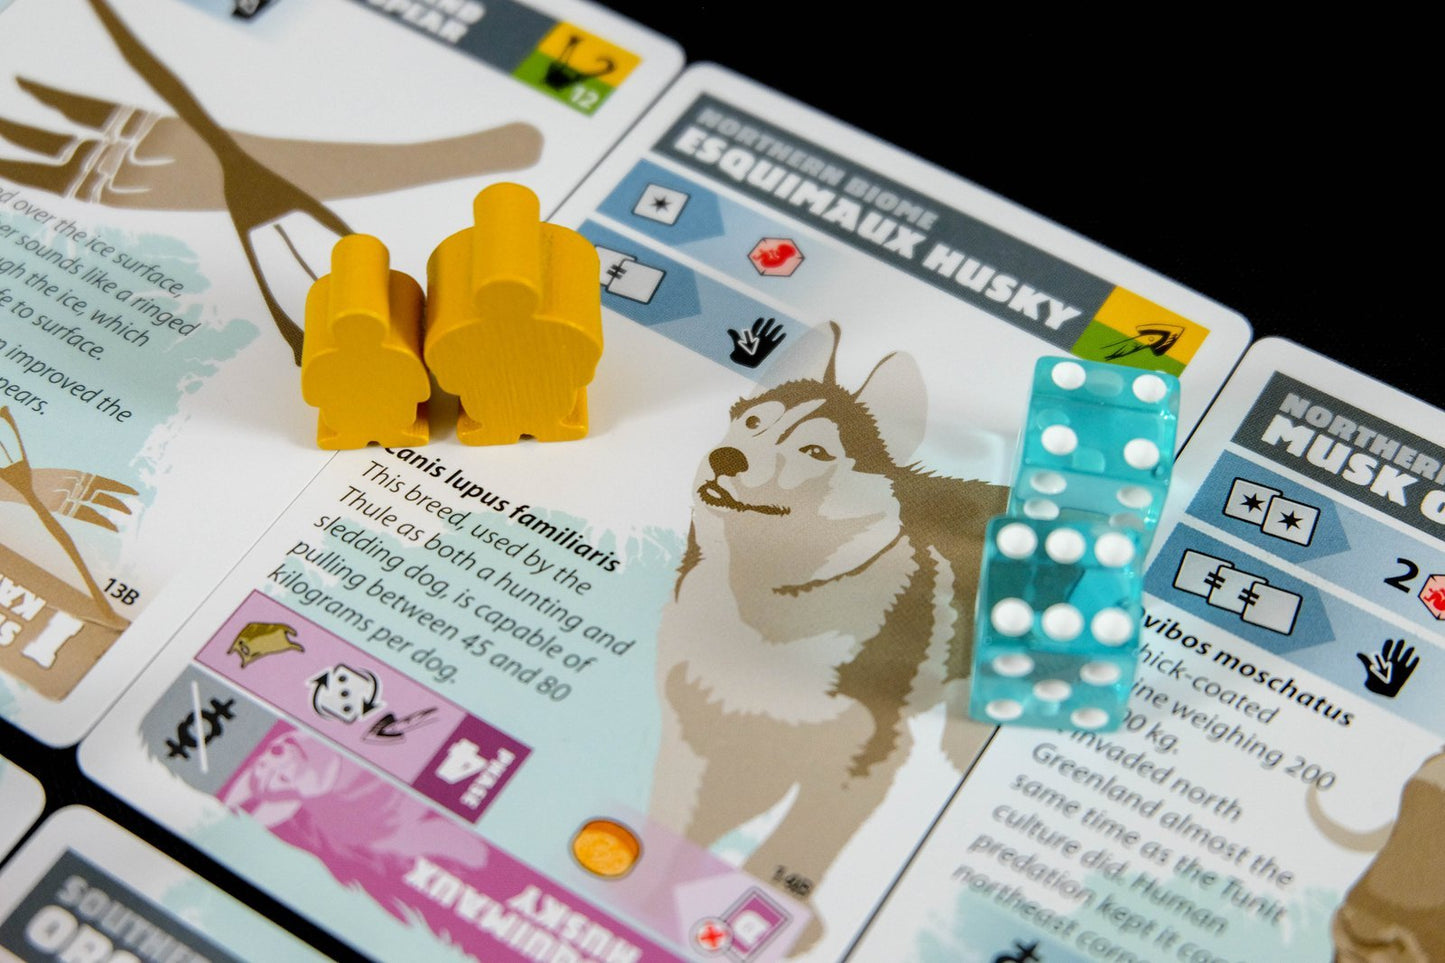 Close up view of one of the region cards displaying the location, "Northern Biome: Esquimaux Husky"